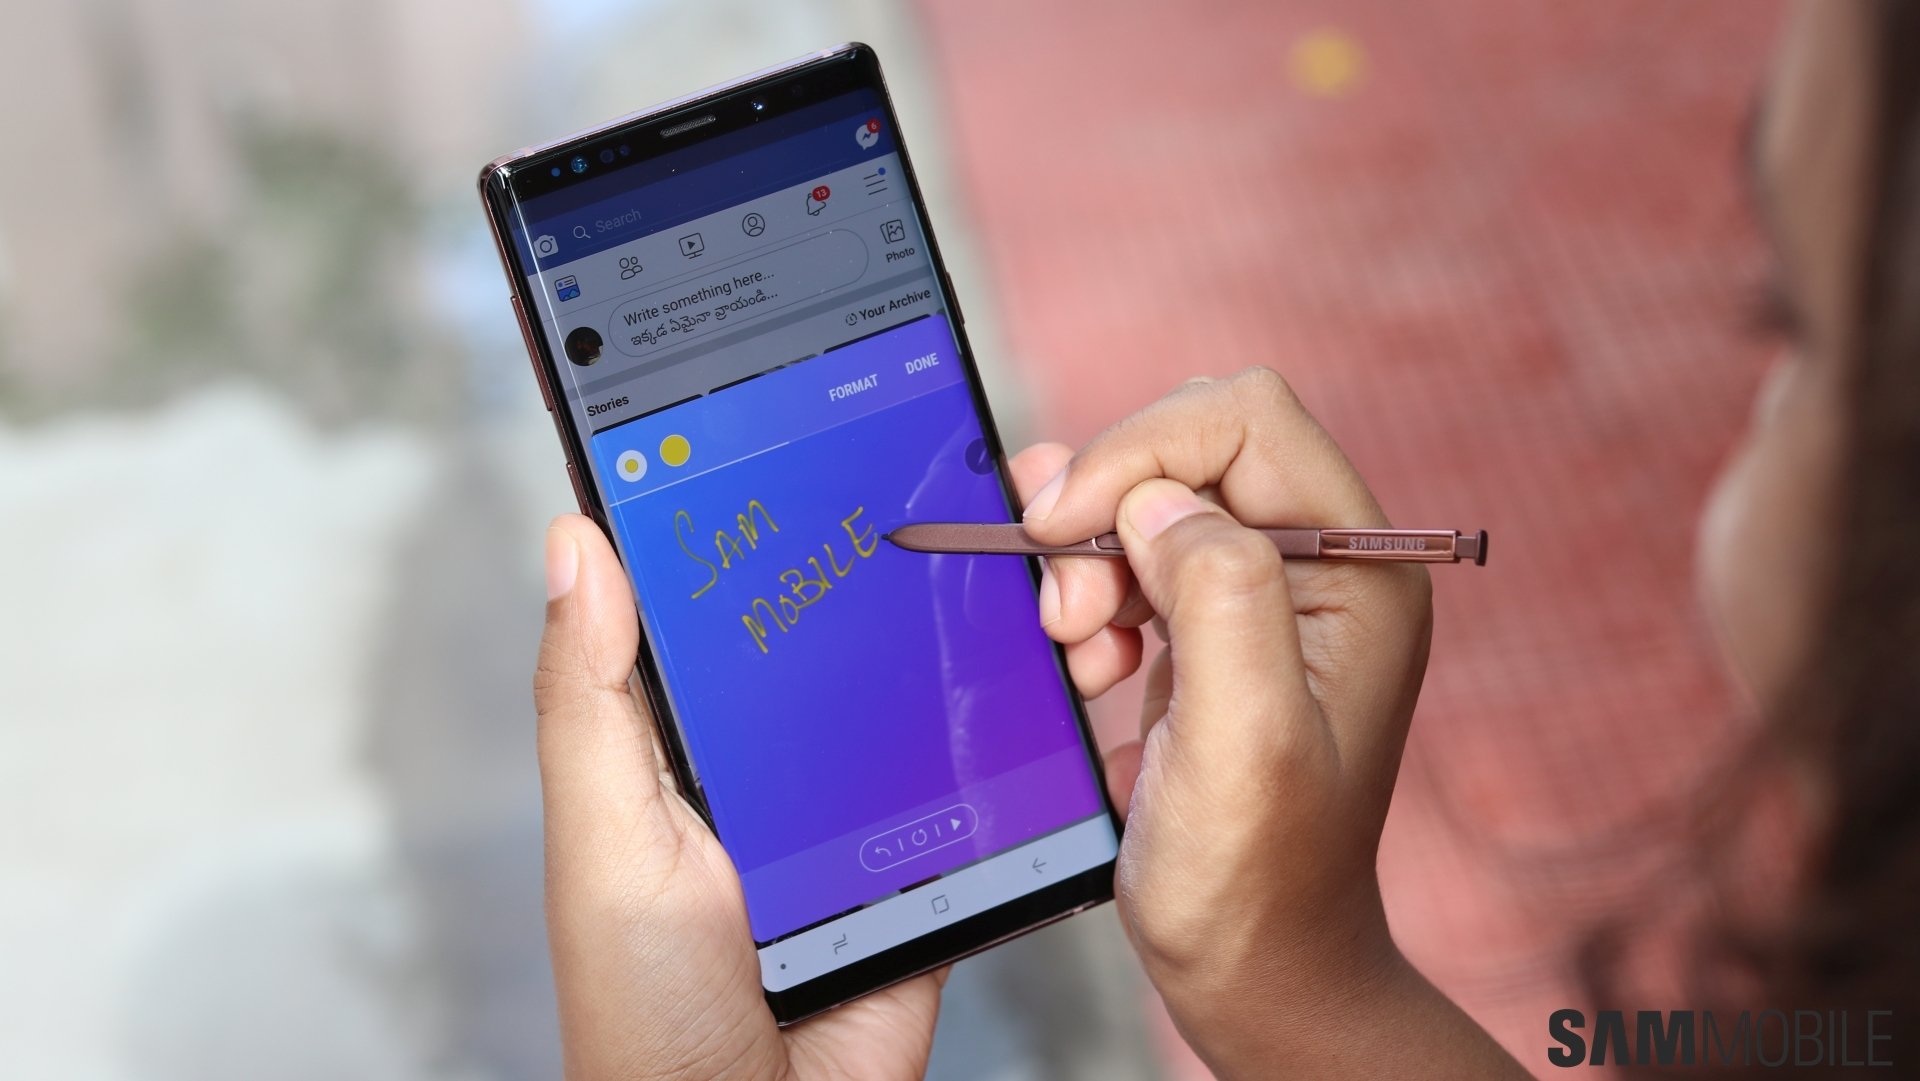 Samsung Galaxy Note 9 Review with Pros and Cons - Should you buy it?